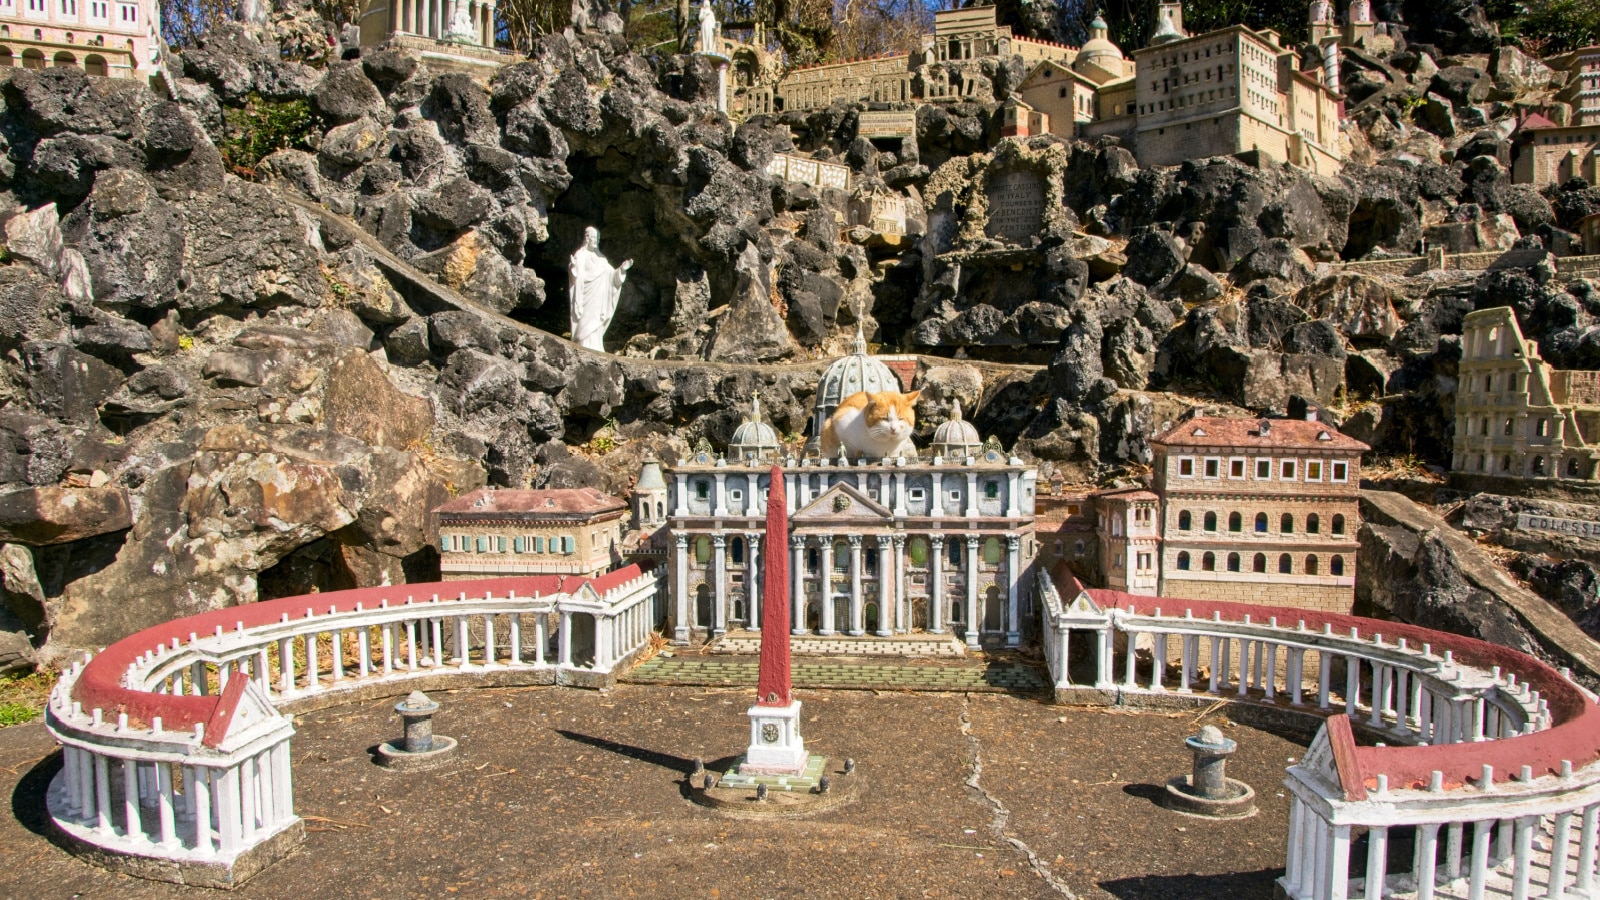 Cullman USA - 13 February 2015 -Cat on top of model of St. Peters Church of Rome in Ave Maria Grotto in Cullman Alabama